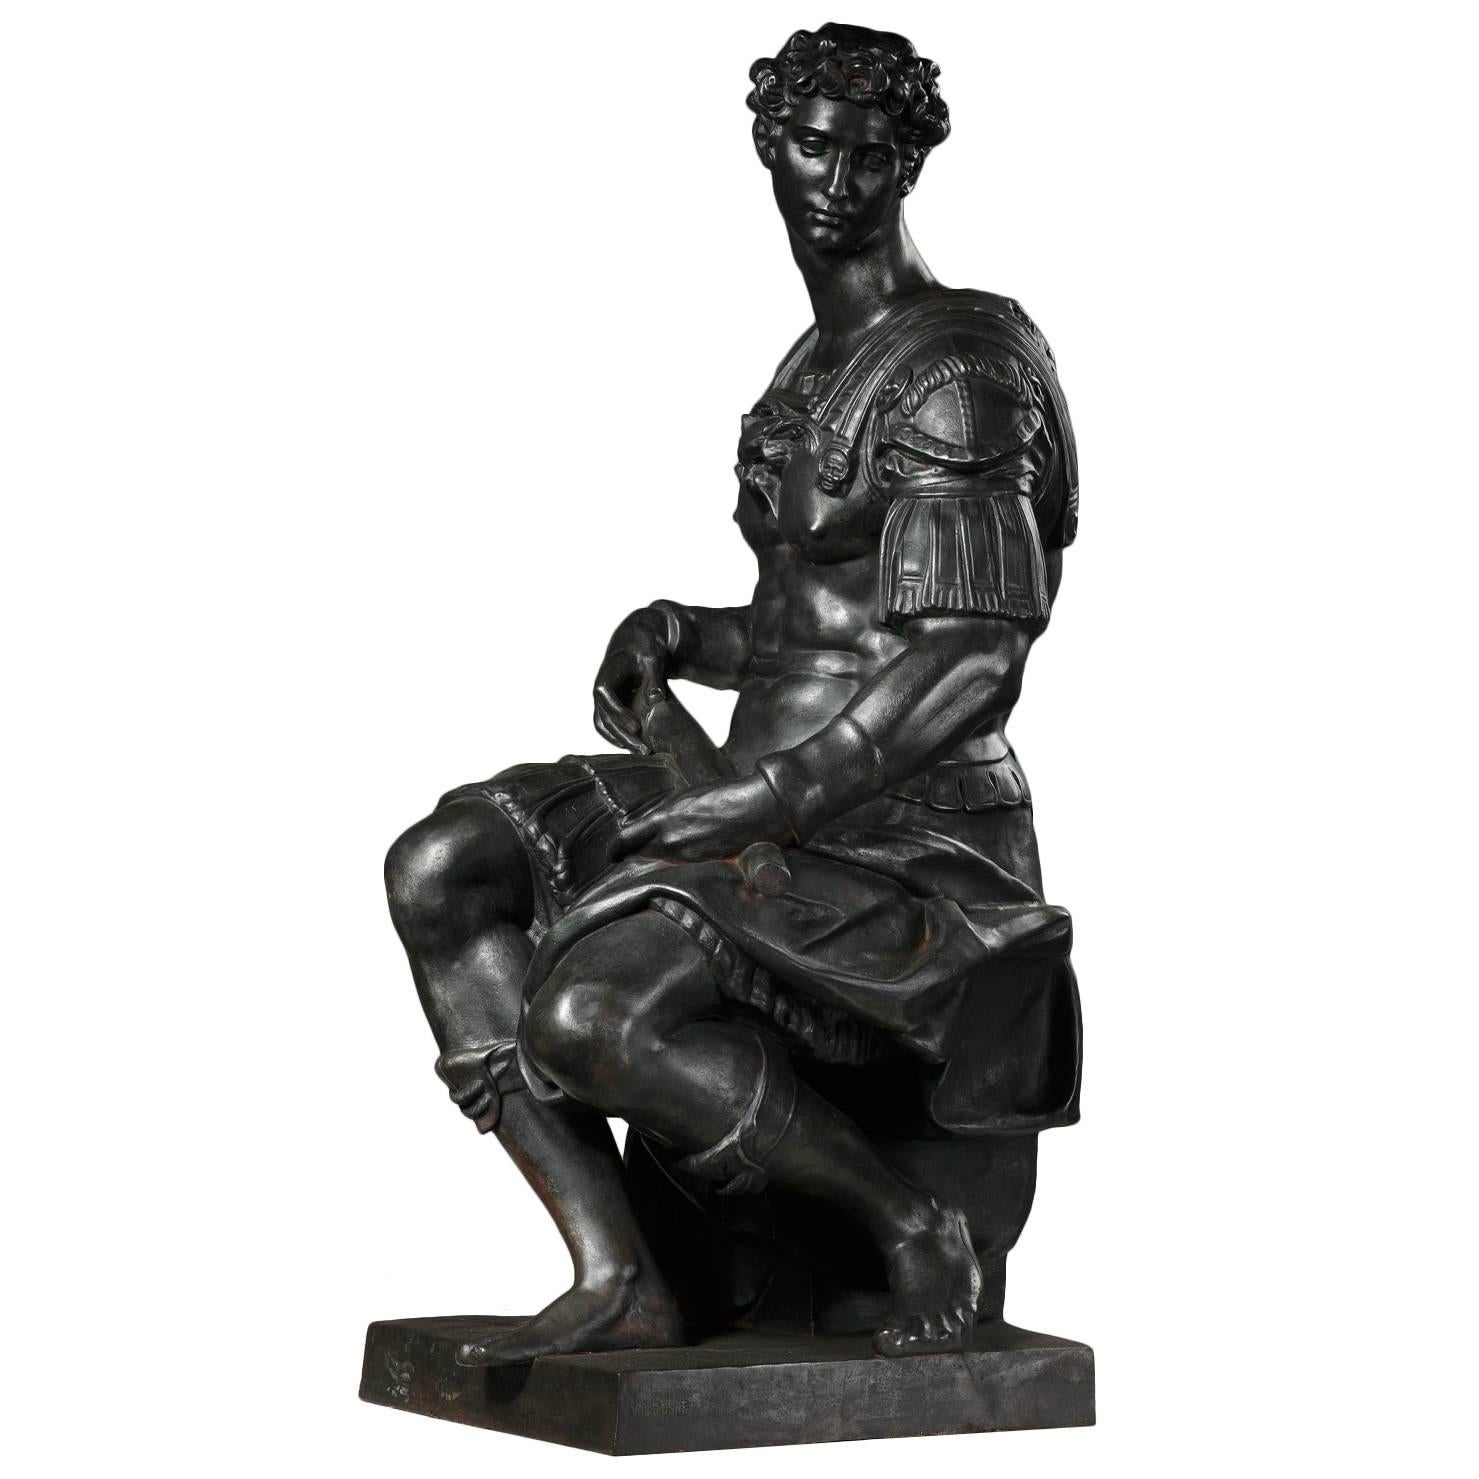 A 19th C. Cast Iron Statue of Giuliano de Medici by Foundry Val d'Osne